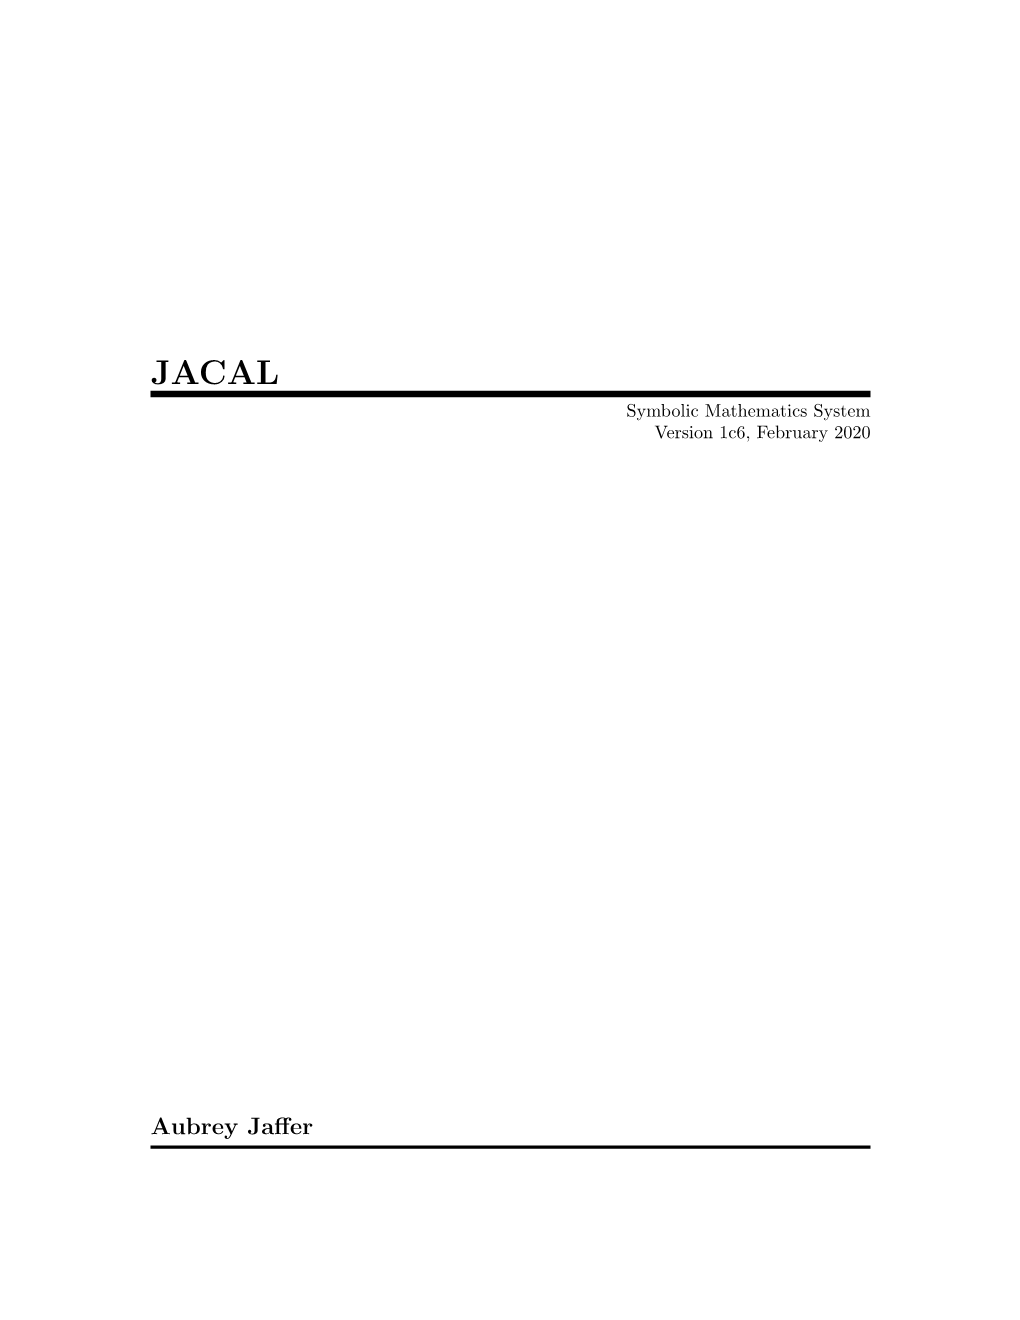 Aubrey Jaffer This Manual Is for JACAL (Version 1C6, February 2020), an Interactive Symbolic Mathe- Matics System